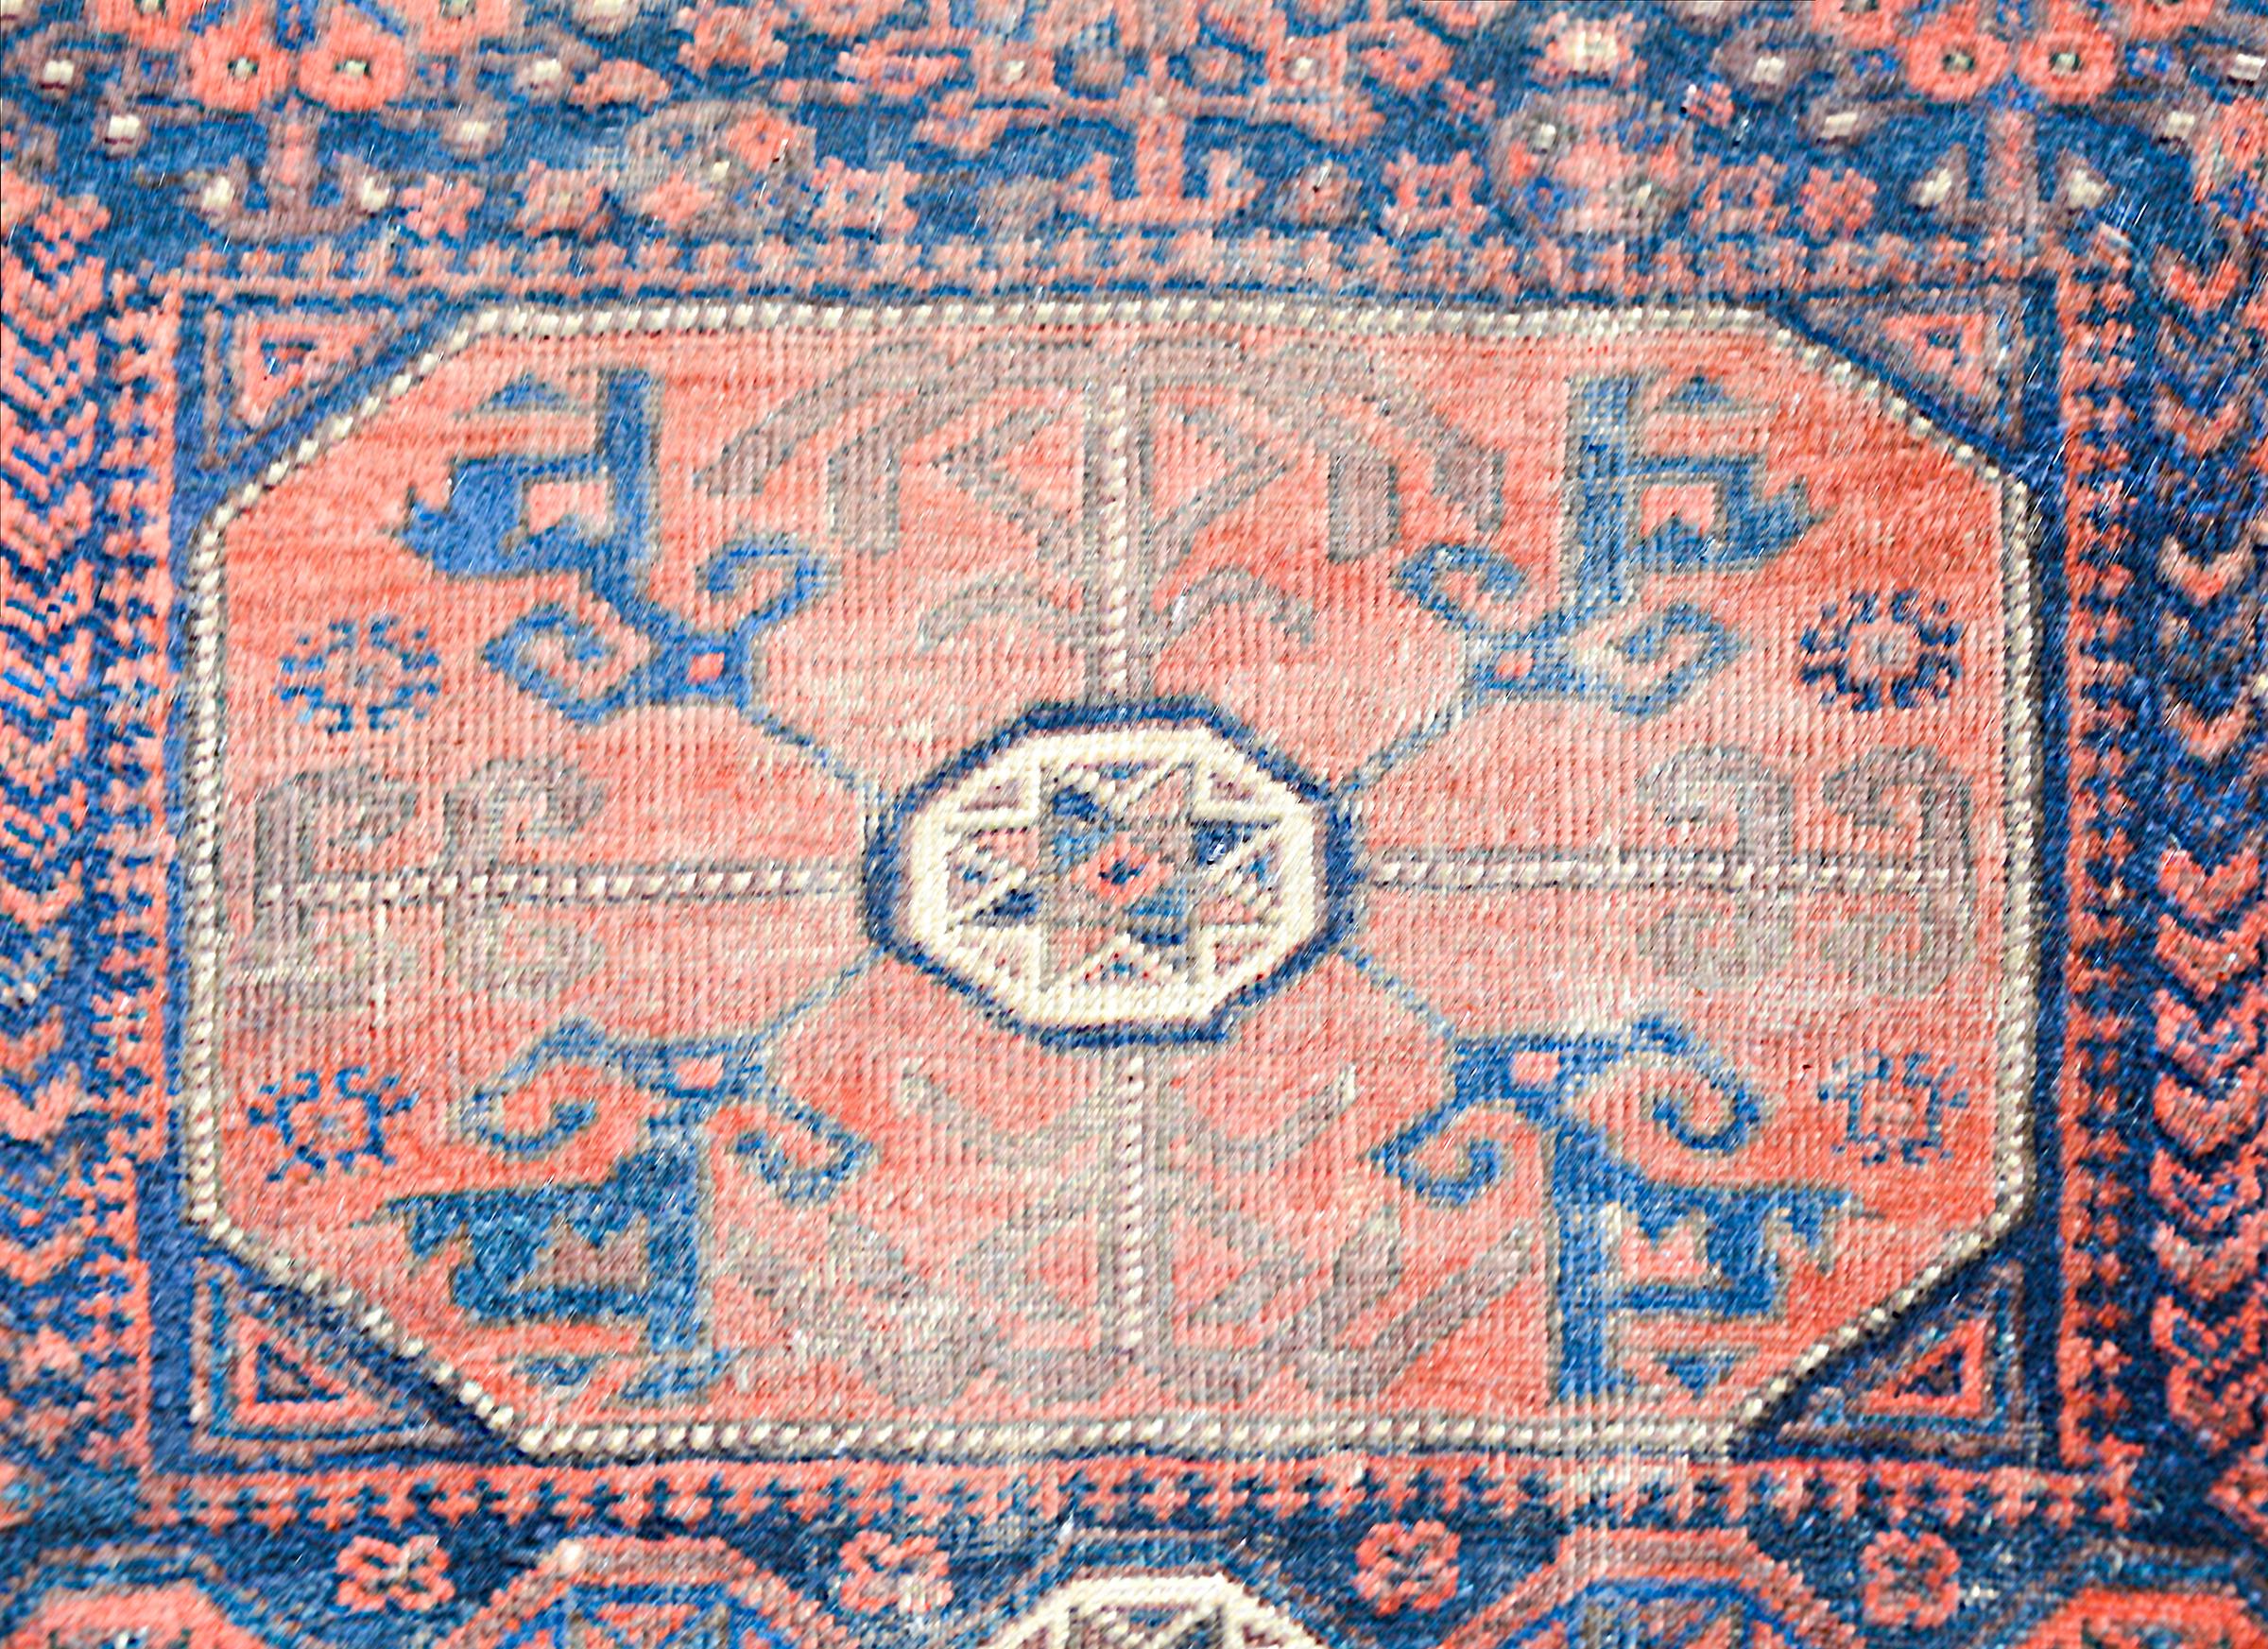 A beautiful early 20th century Persian Baluch rug with a fantastic tribal pattern containing multiple stylized flowers woven in crimson, indigo, brown, and white, and surrounded by a wonderfully stylized flower with leaves patterned border.